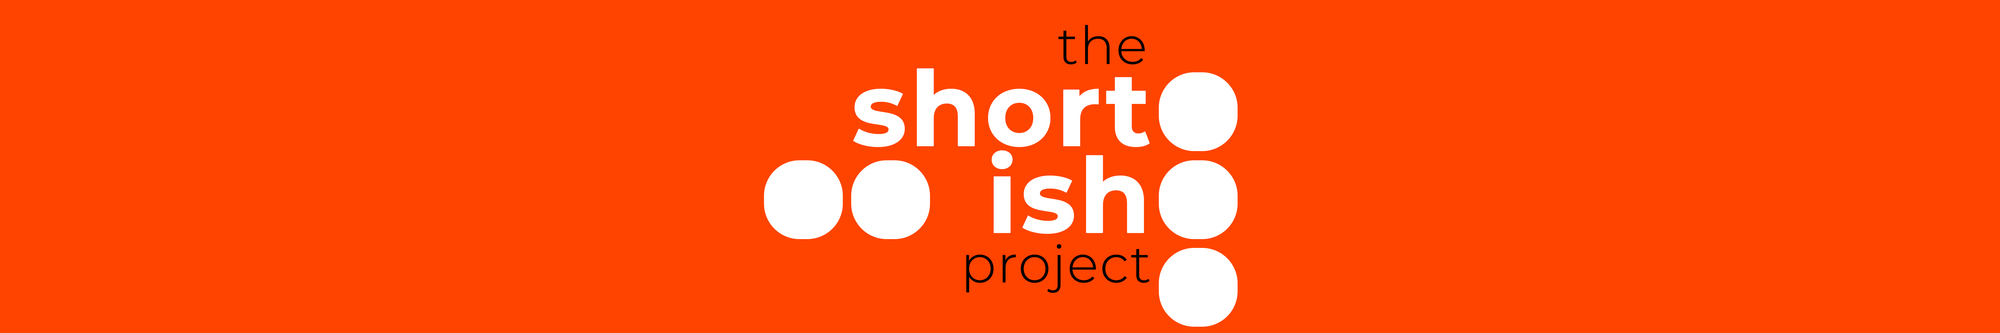 The Shortish Project